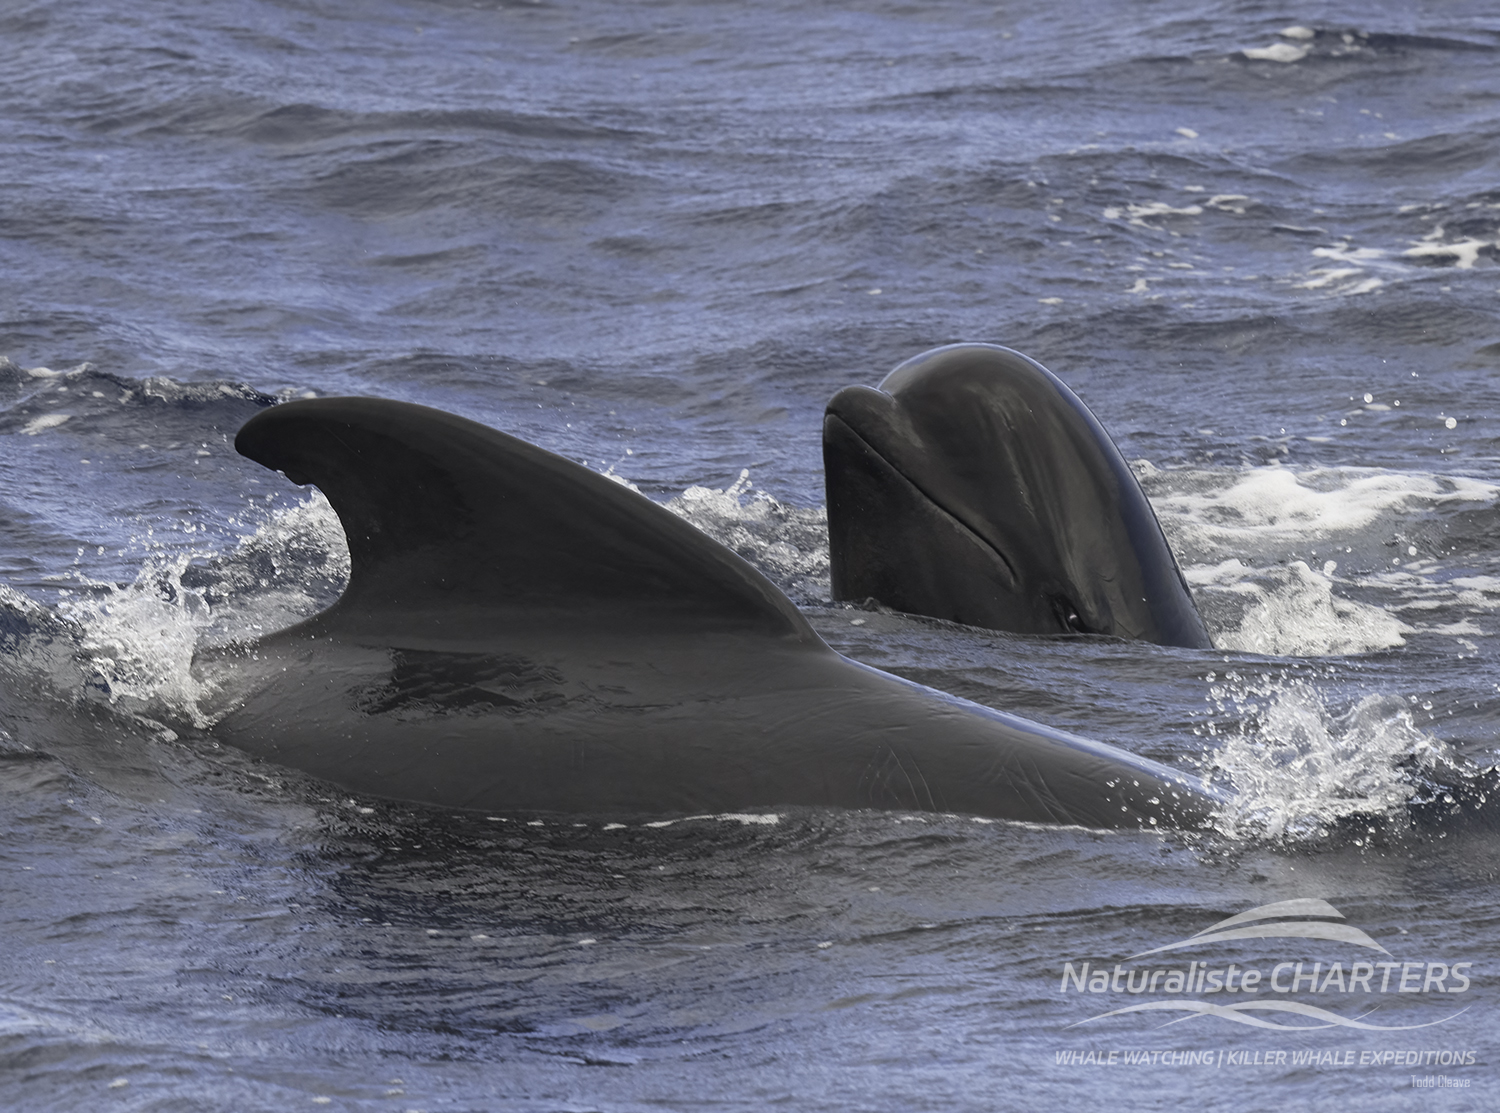 A large crowd of pilot whales followed our boat the Alison-Maree